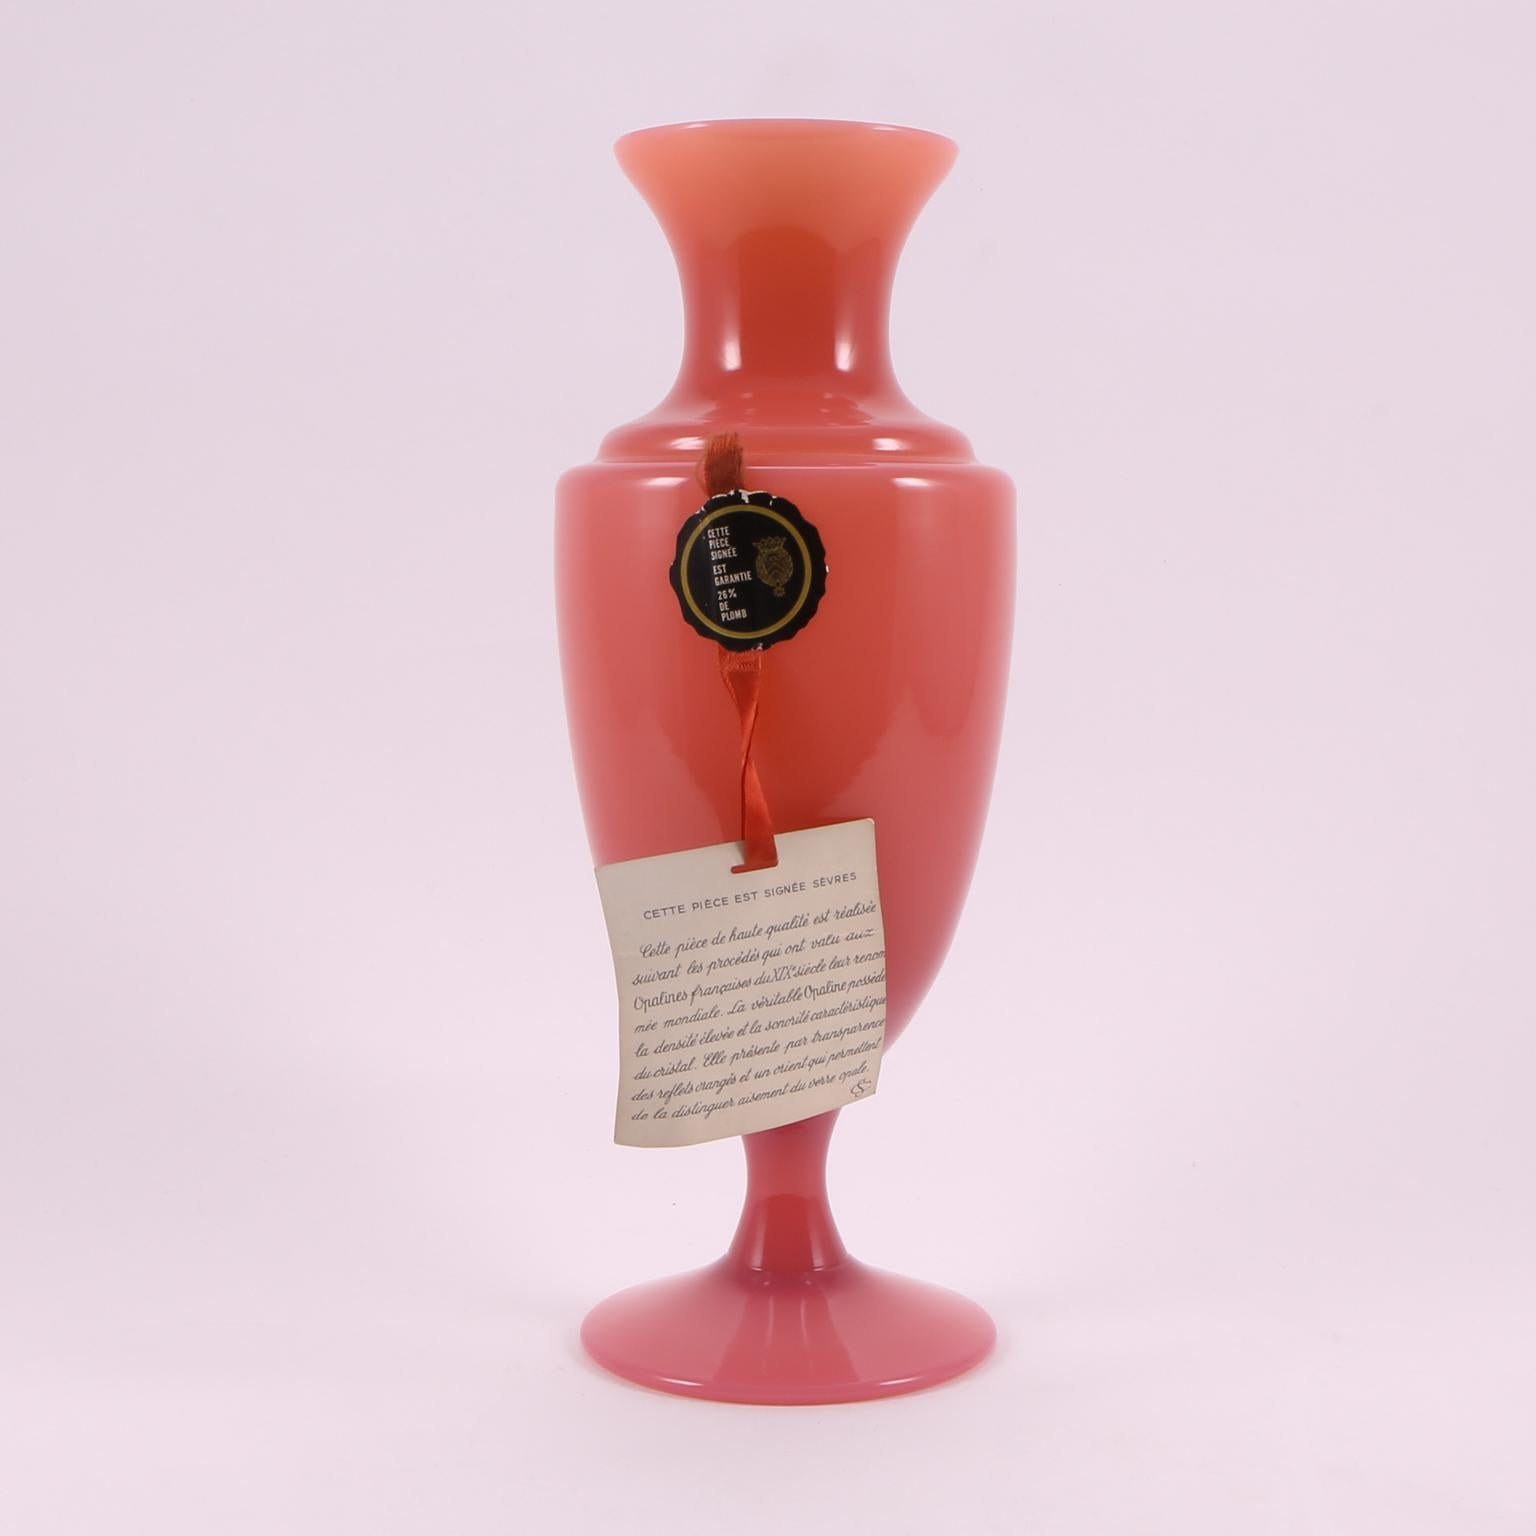 A charming Sèvres Cranberry pink opaline vase, hand blown in France, with a slender and elegant body.
Hand blown in France, with original ribbon and label, that are in perfect shape, and on the backward of the card you will find a description of